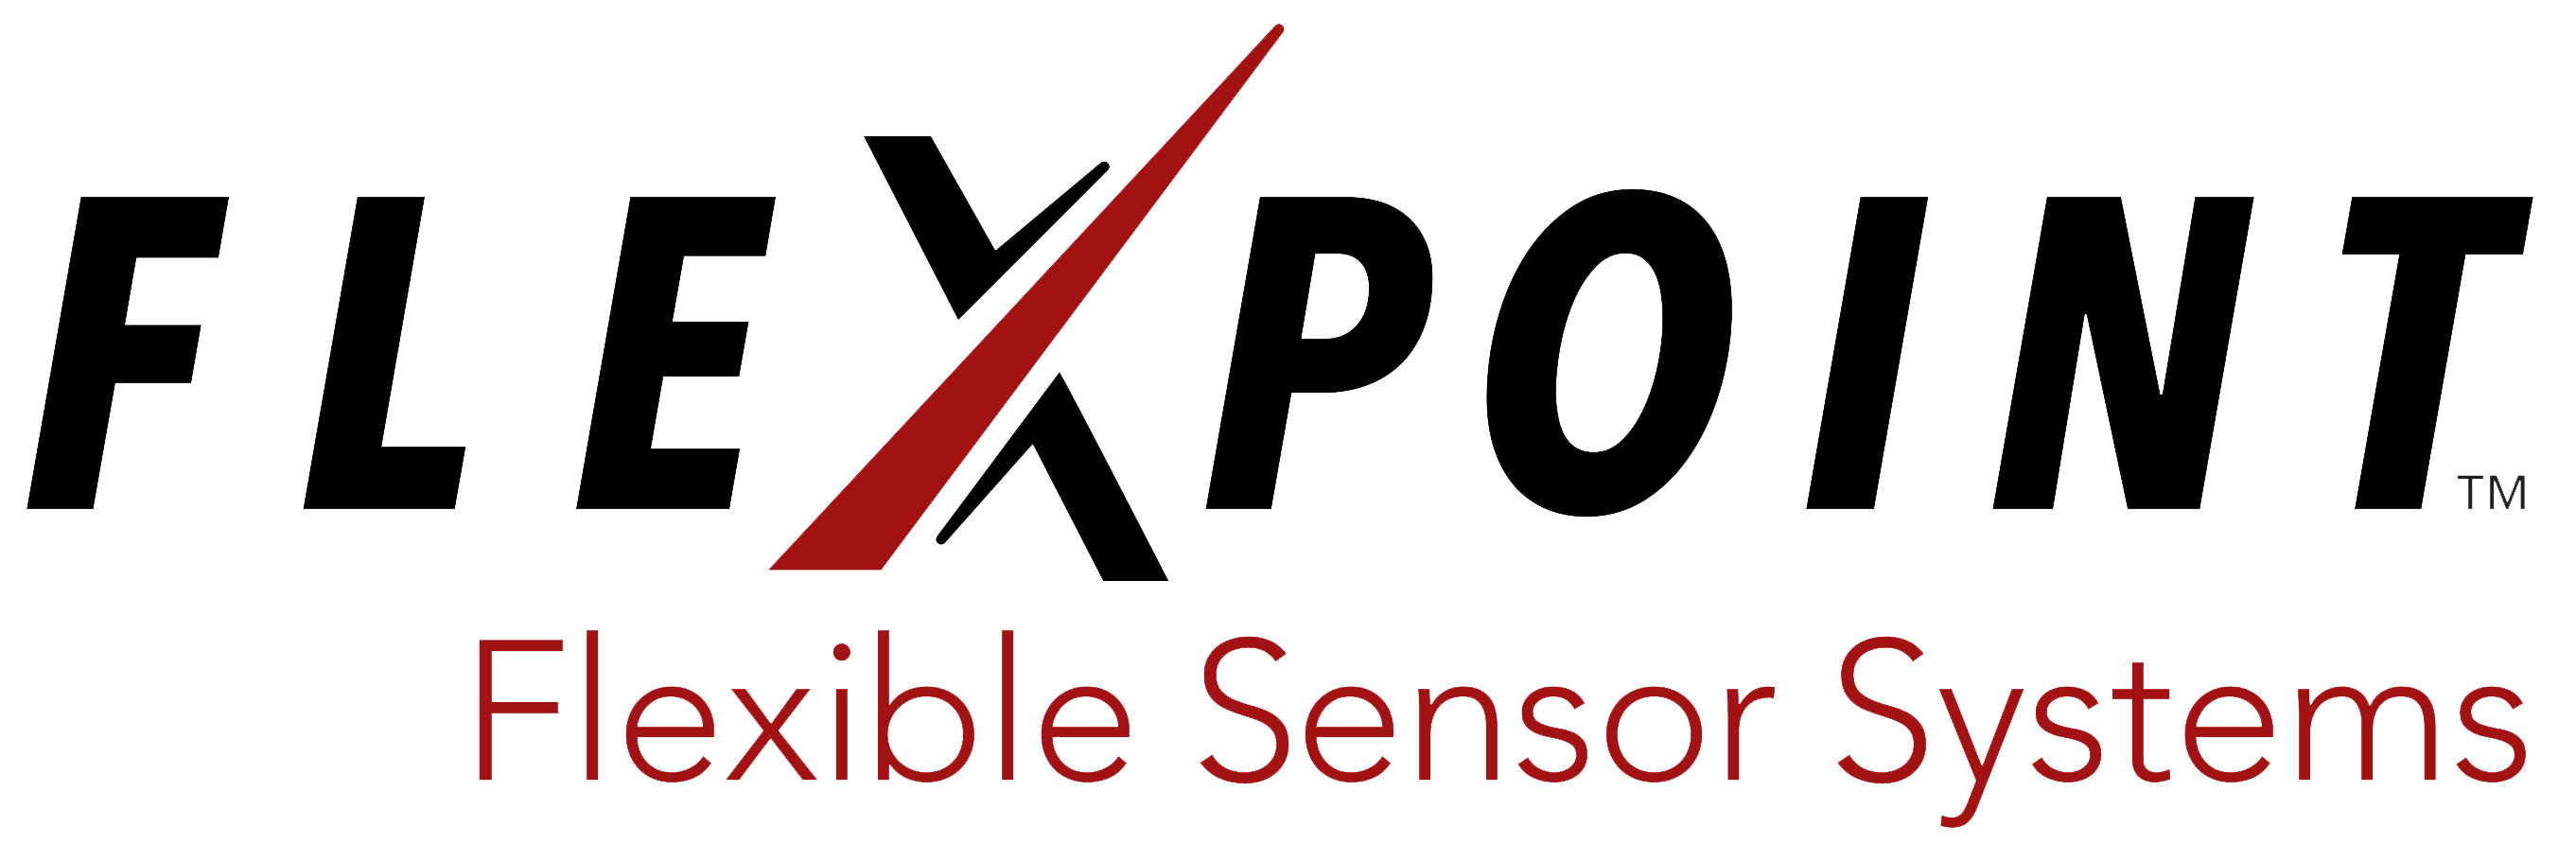 Flexpoint Sensor Systems, Inc., Friday, August 9, 2019, Press release picture